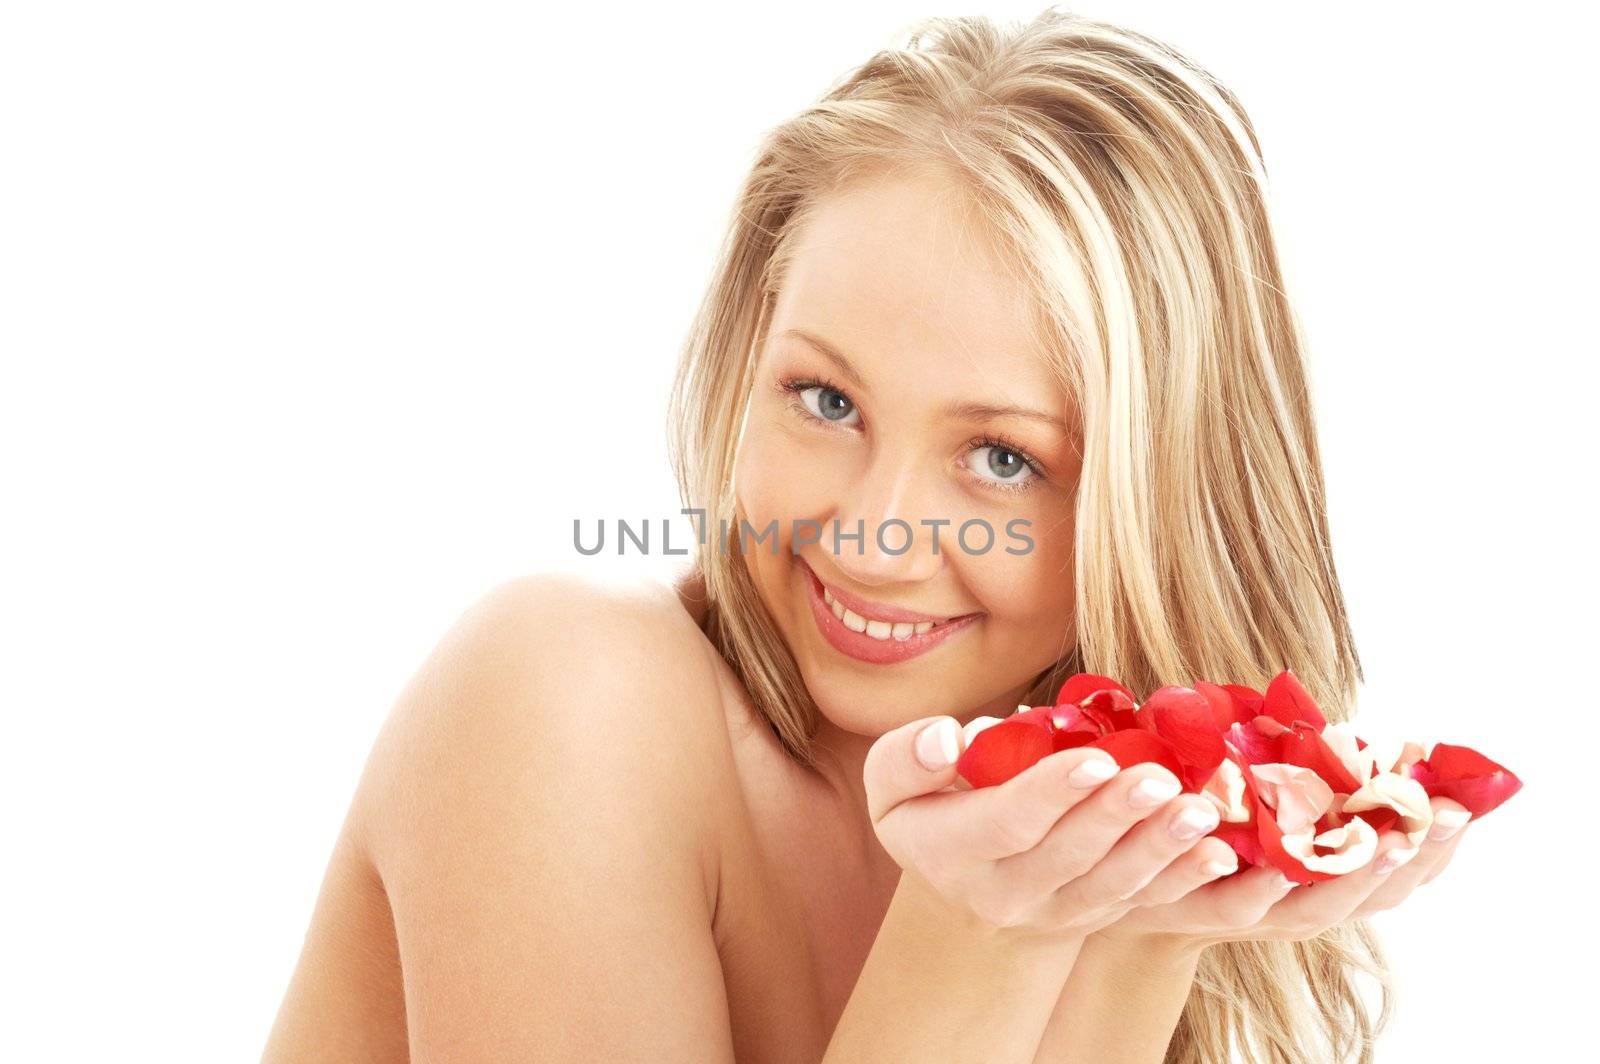 lovely blond in spa with red and white rose petals #3 by dolgachov